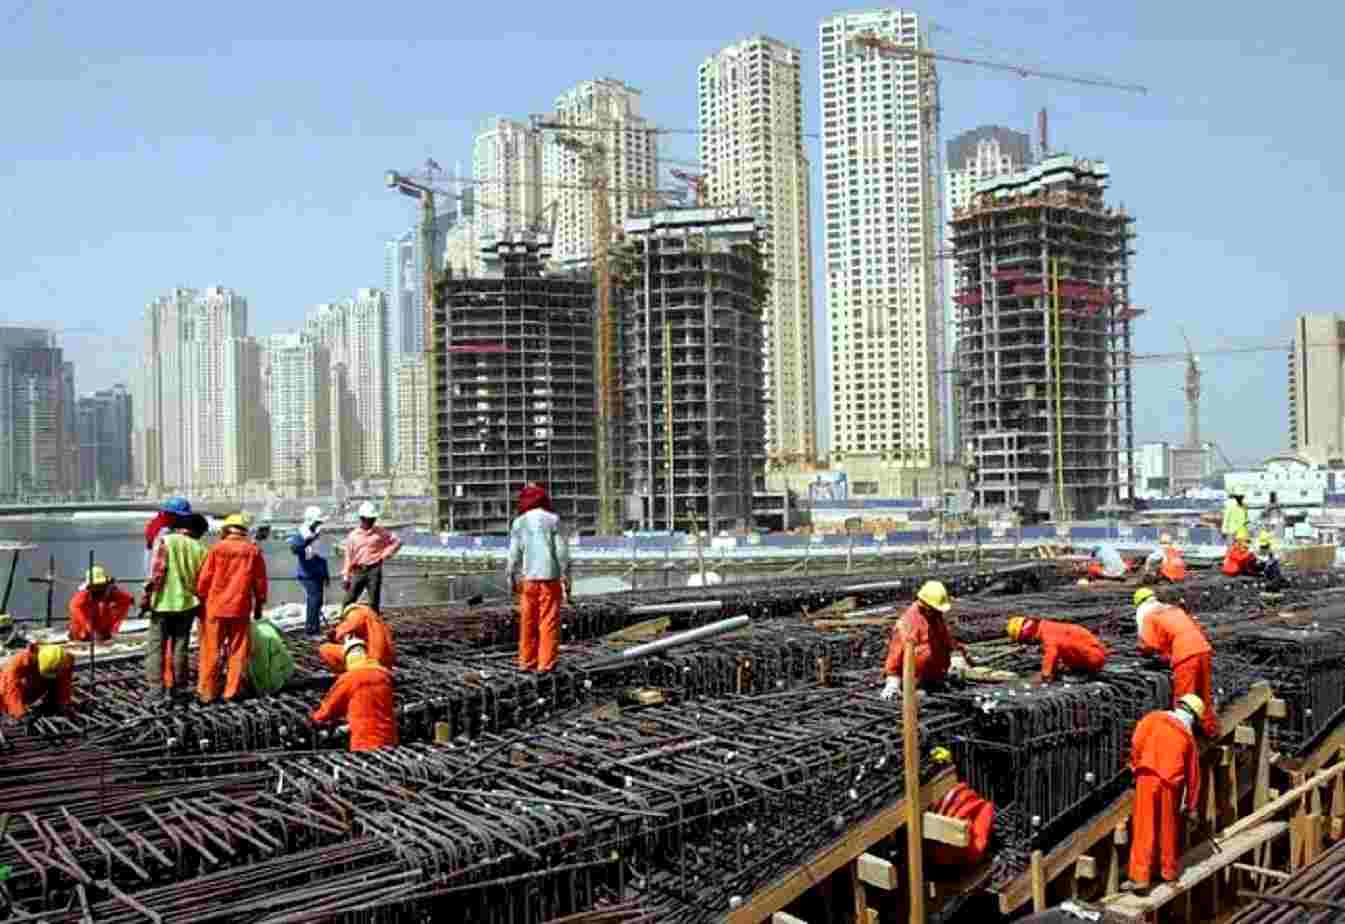 Construction professionals express worry over low performance of sector